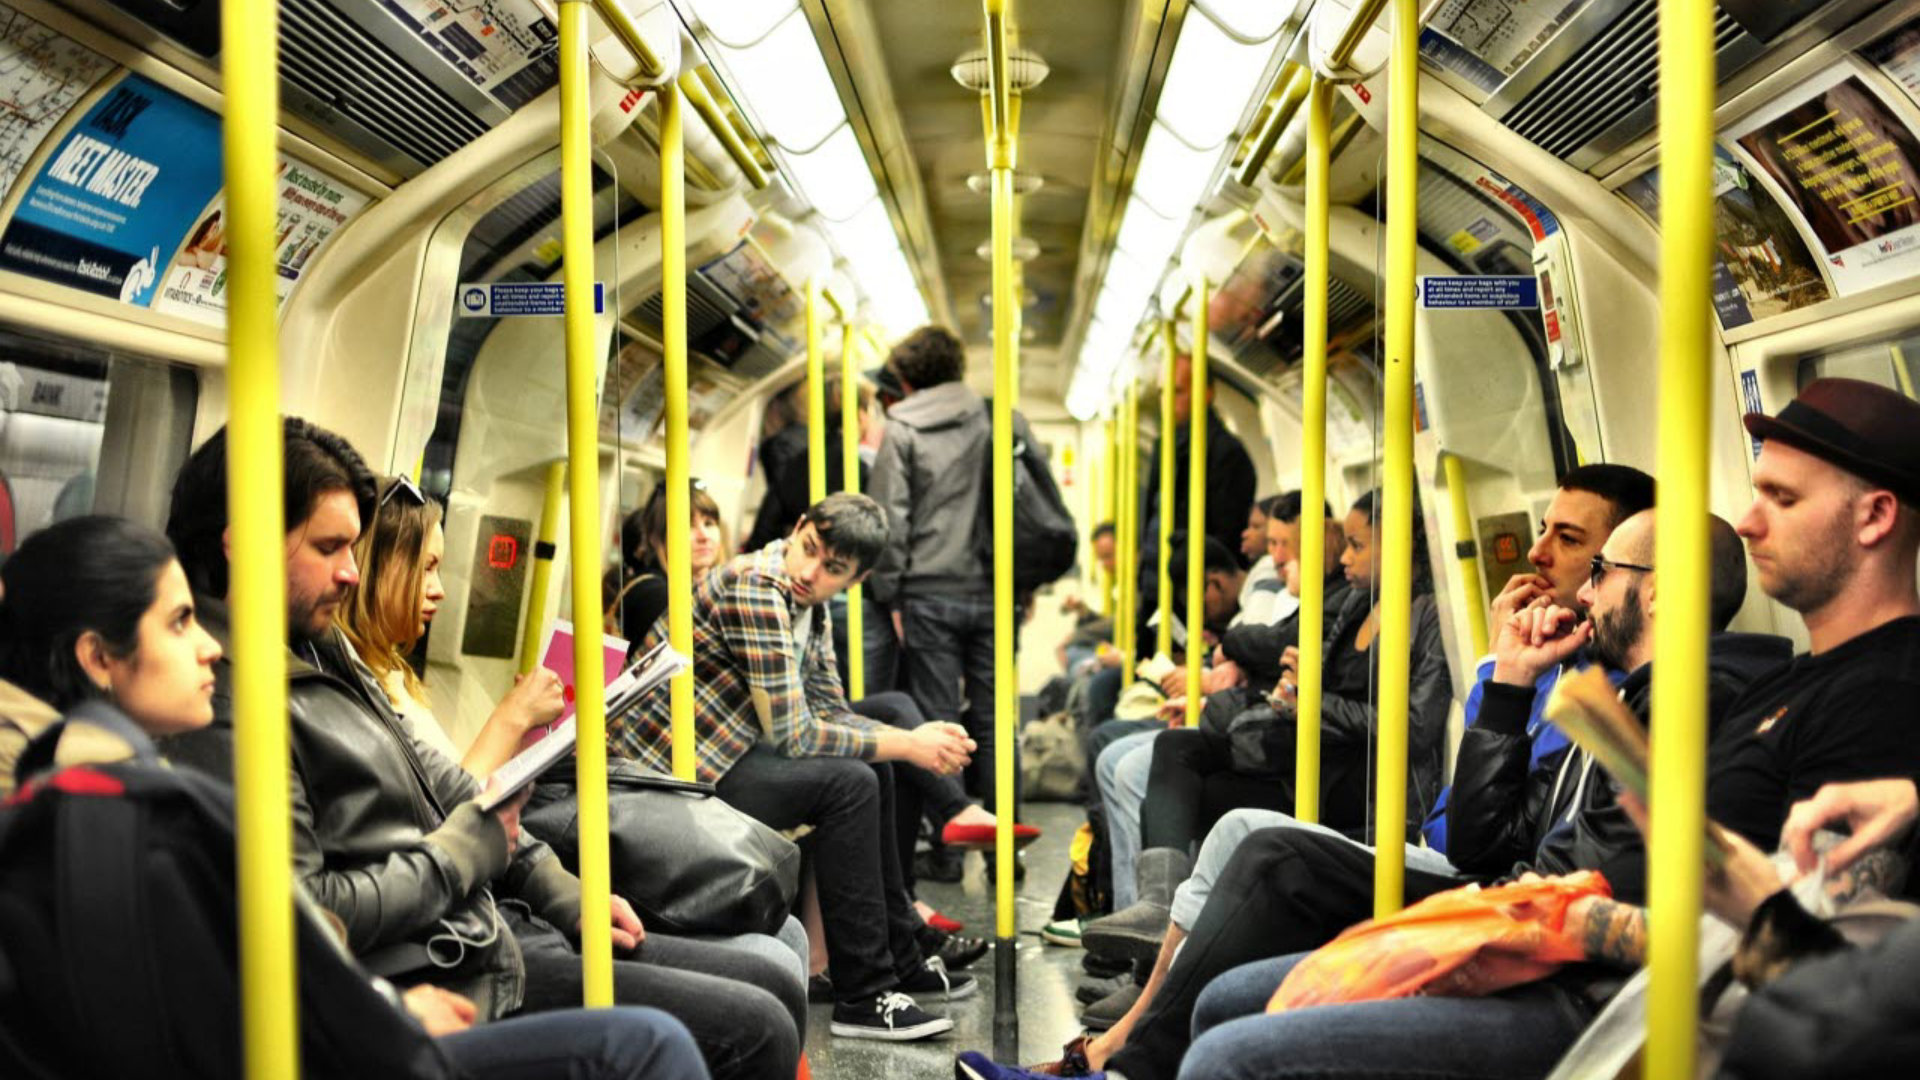 Busy carriage on a London Underground train